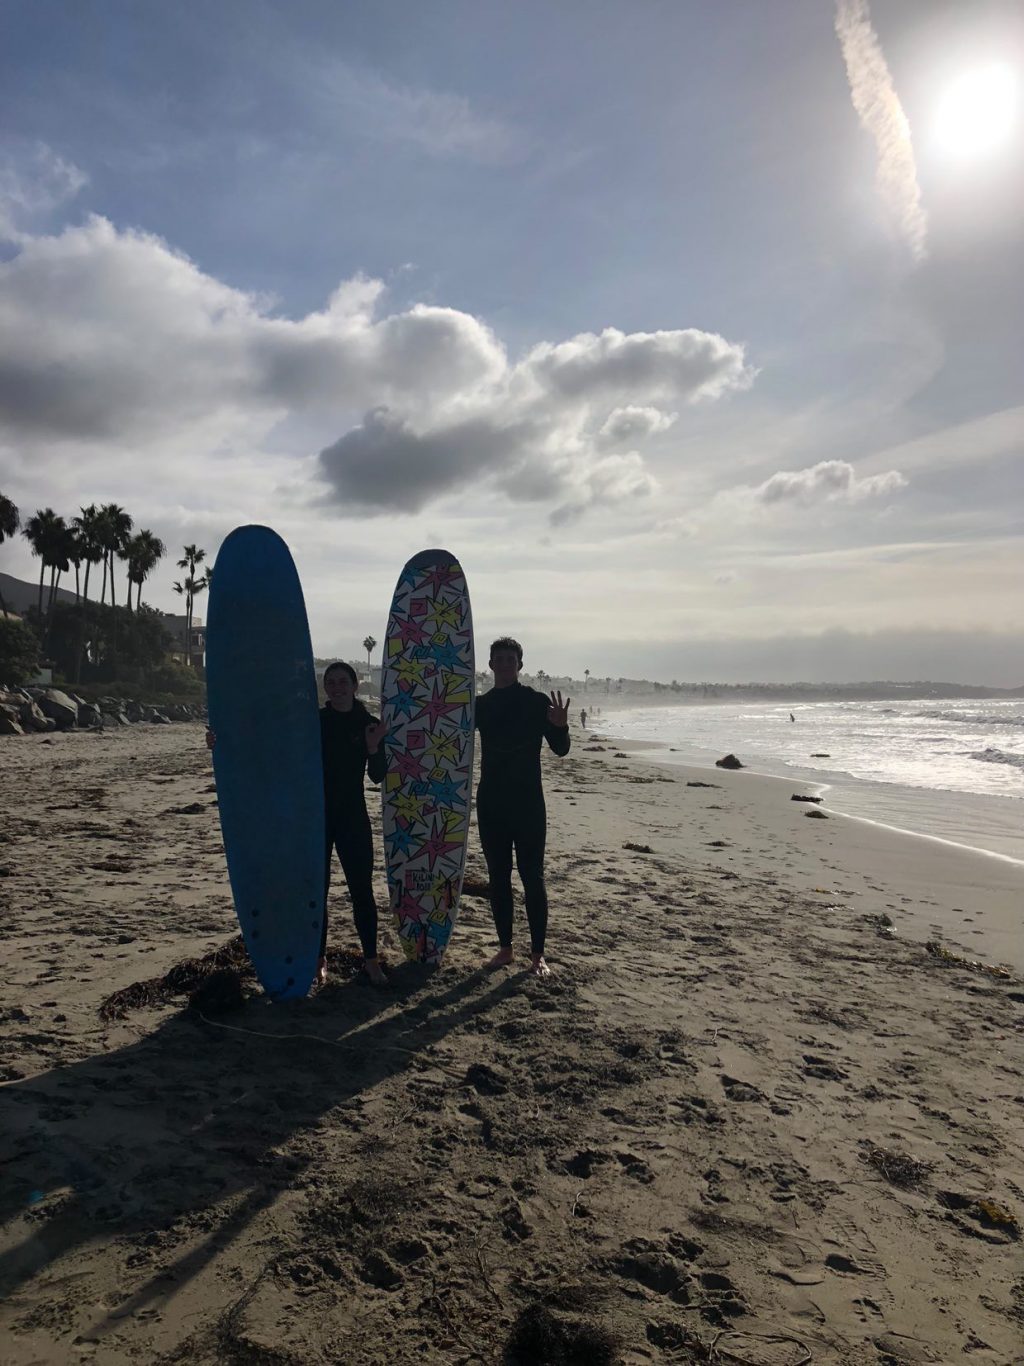 Troy and his twin sister practiced surfing while on his official visit to Pepperdine. Troy looks forward to trying new things when he comes to Malibu in the fall.